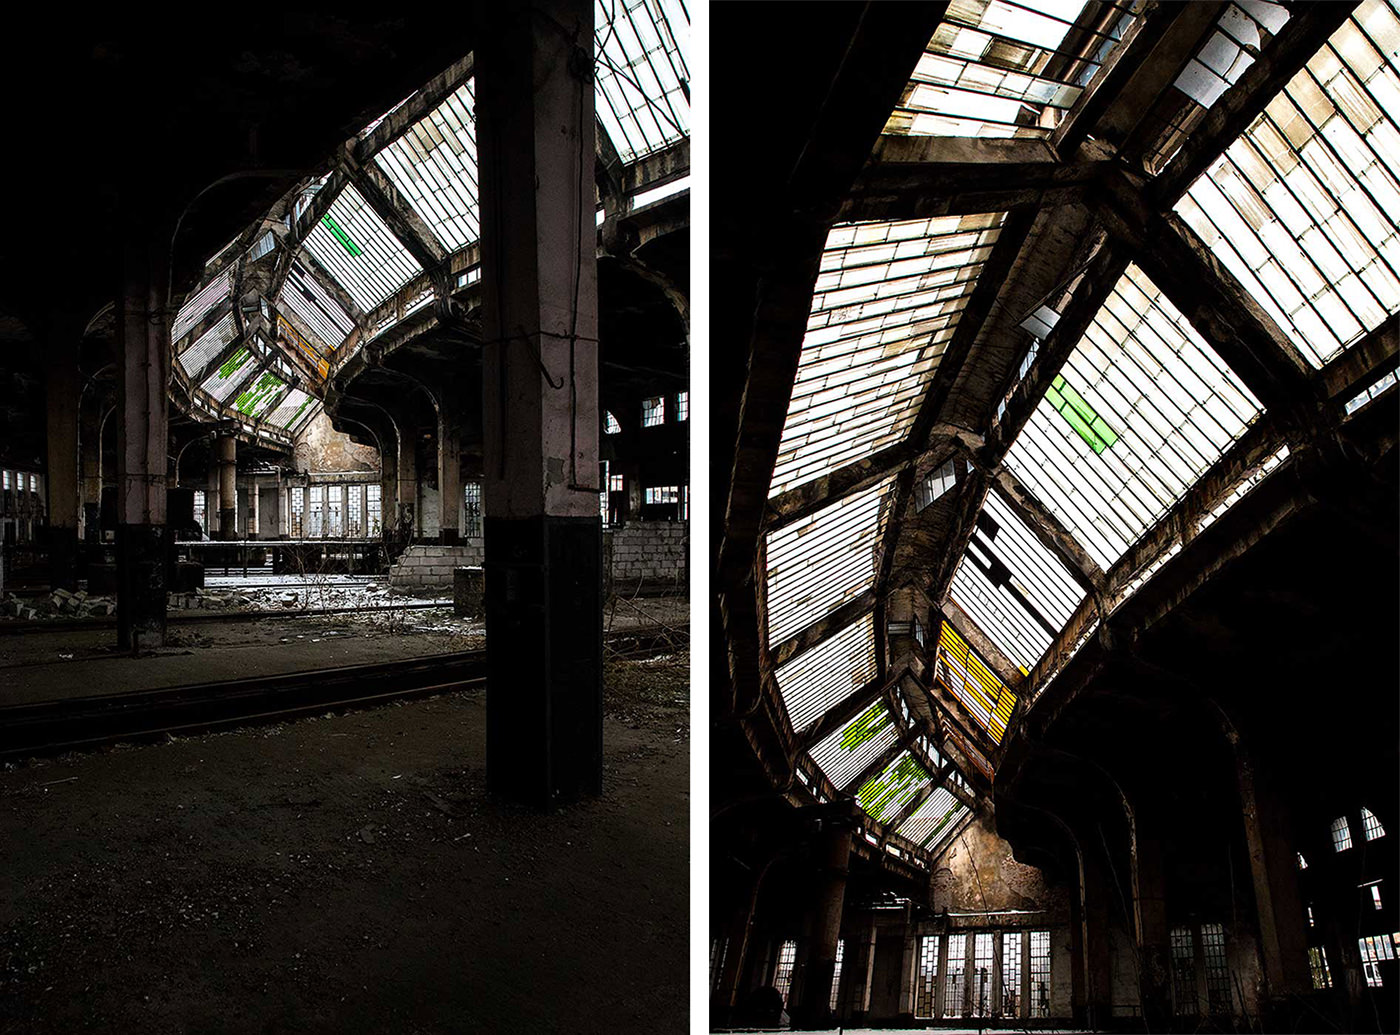 Two angles of the curved roof and coloured skylights inside the old train shed.